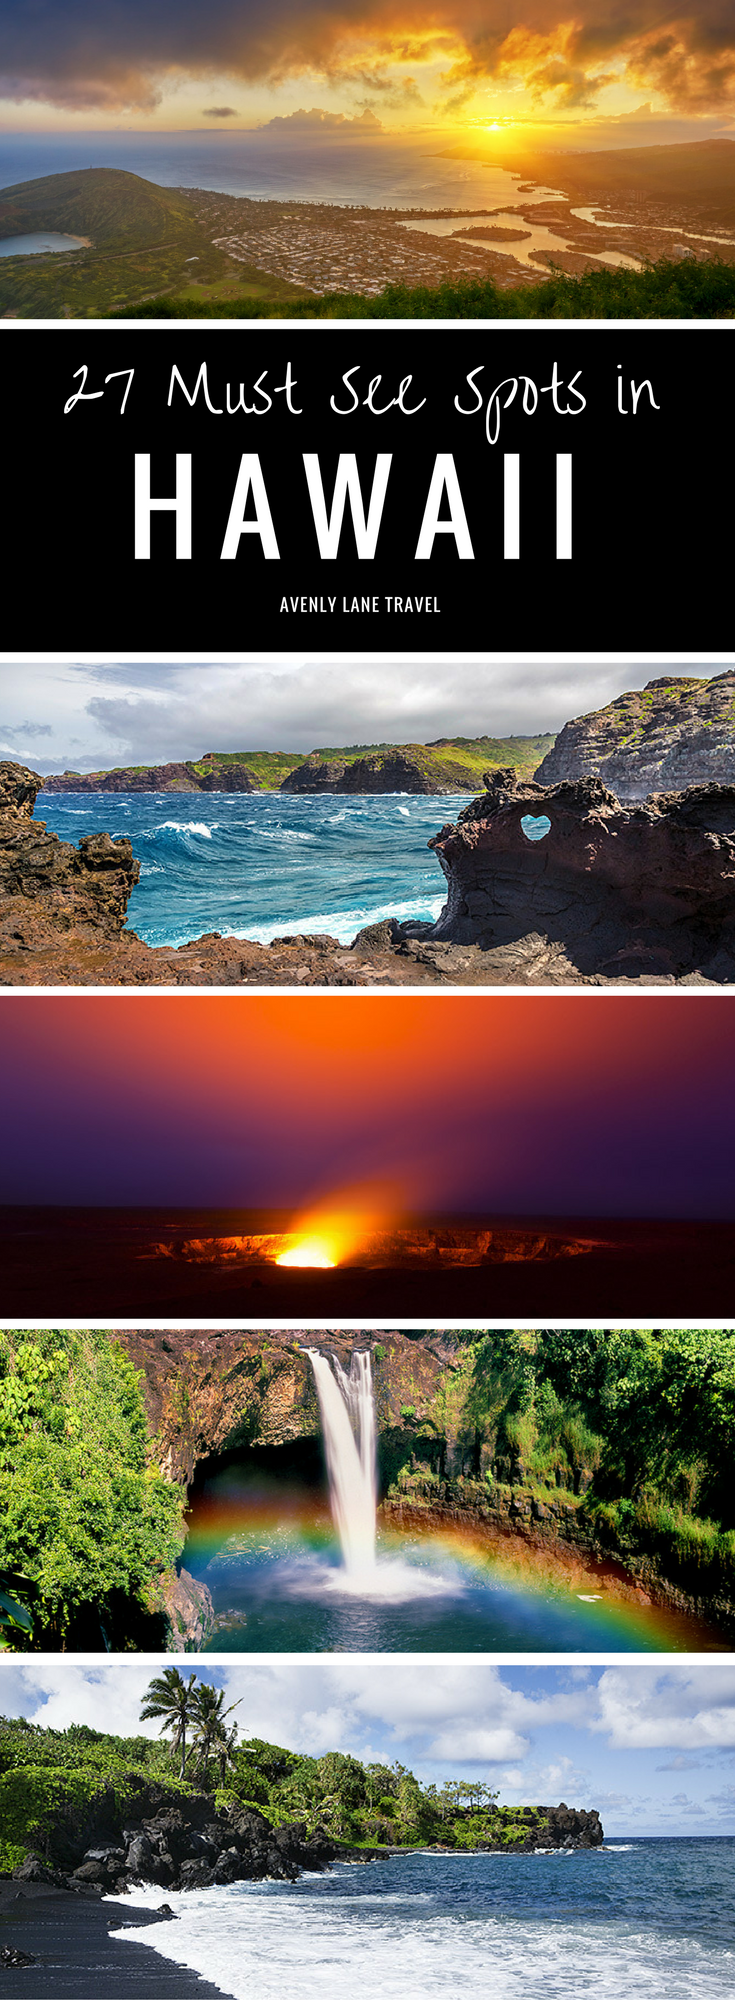 27 Of The Most Incredible Places To Visit In Hawaii -   16 travel destinations Hawaii beautiful places ideas